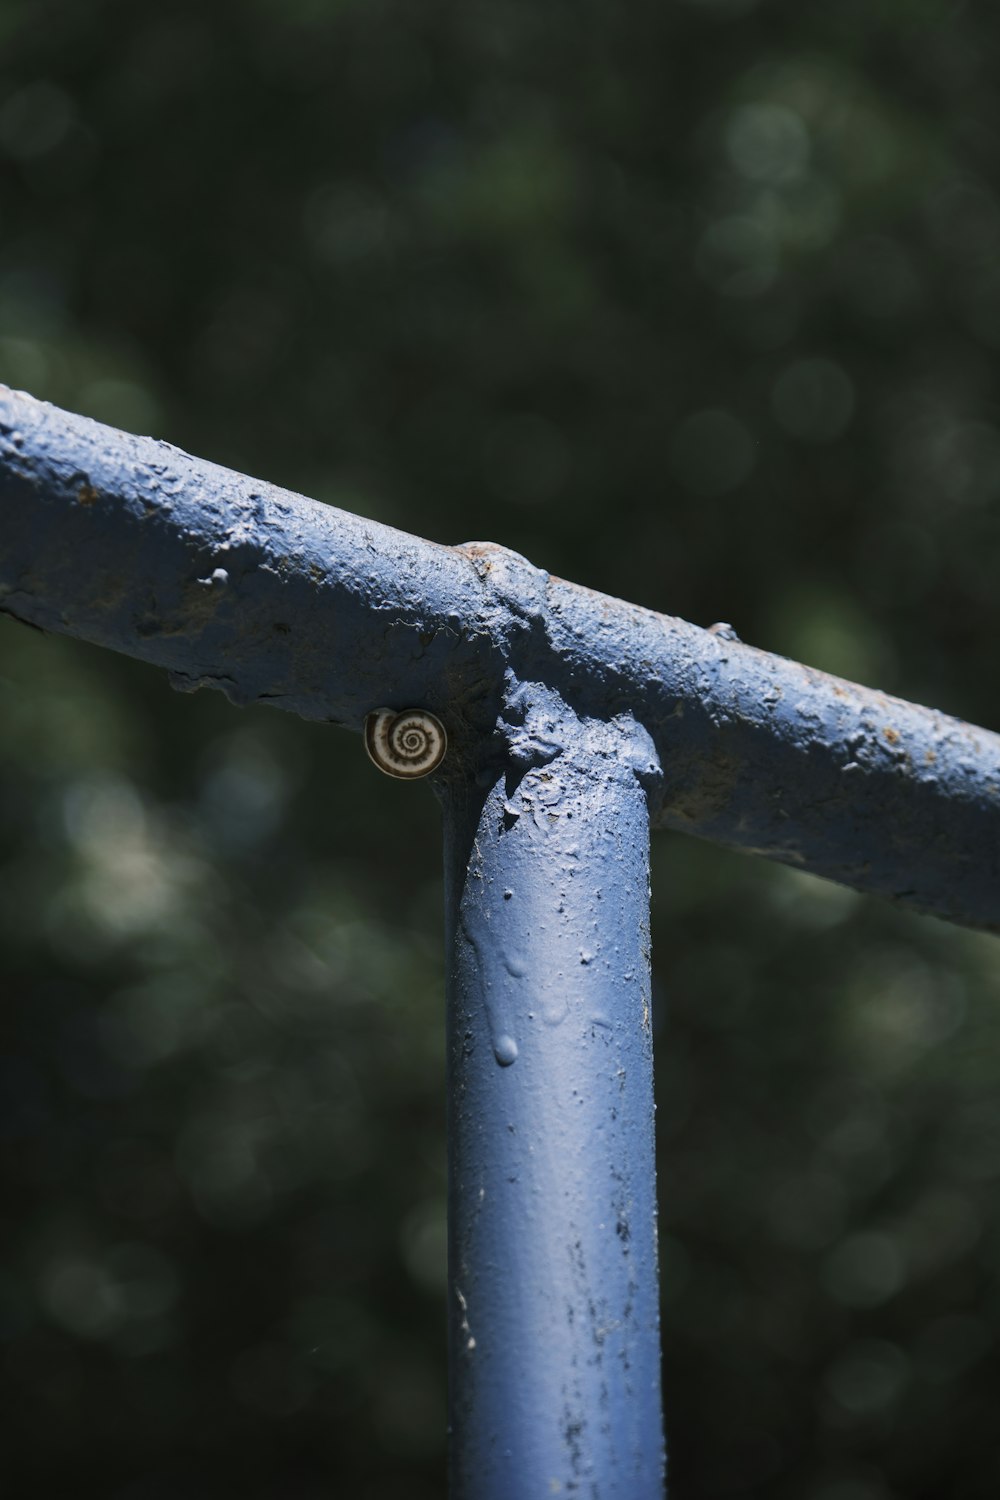 a close up of a metal rail with trees in the background